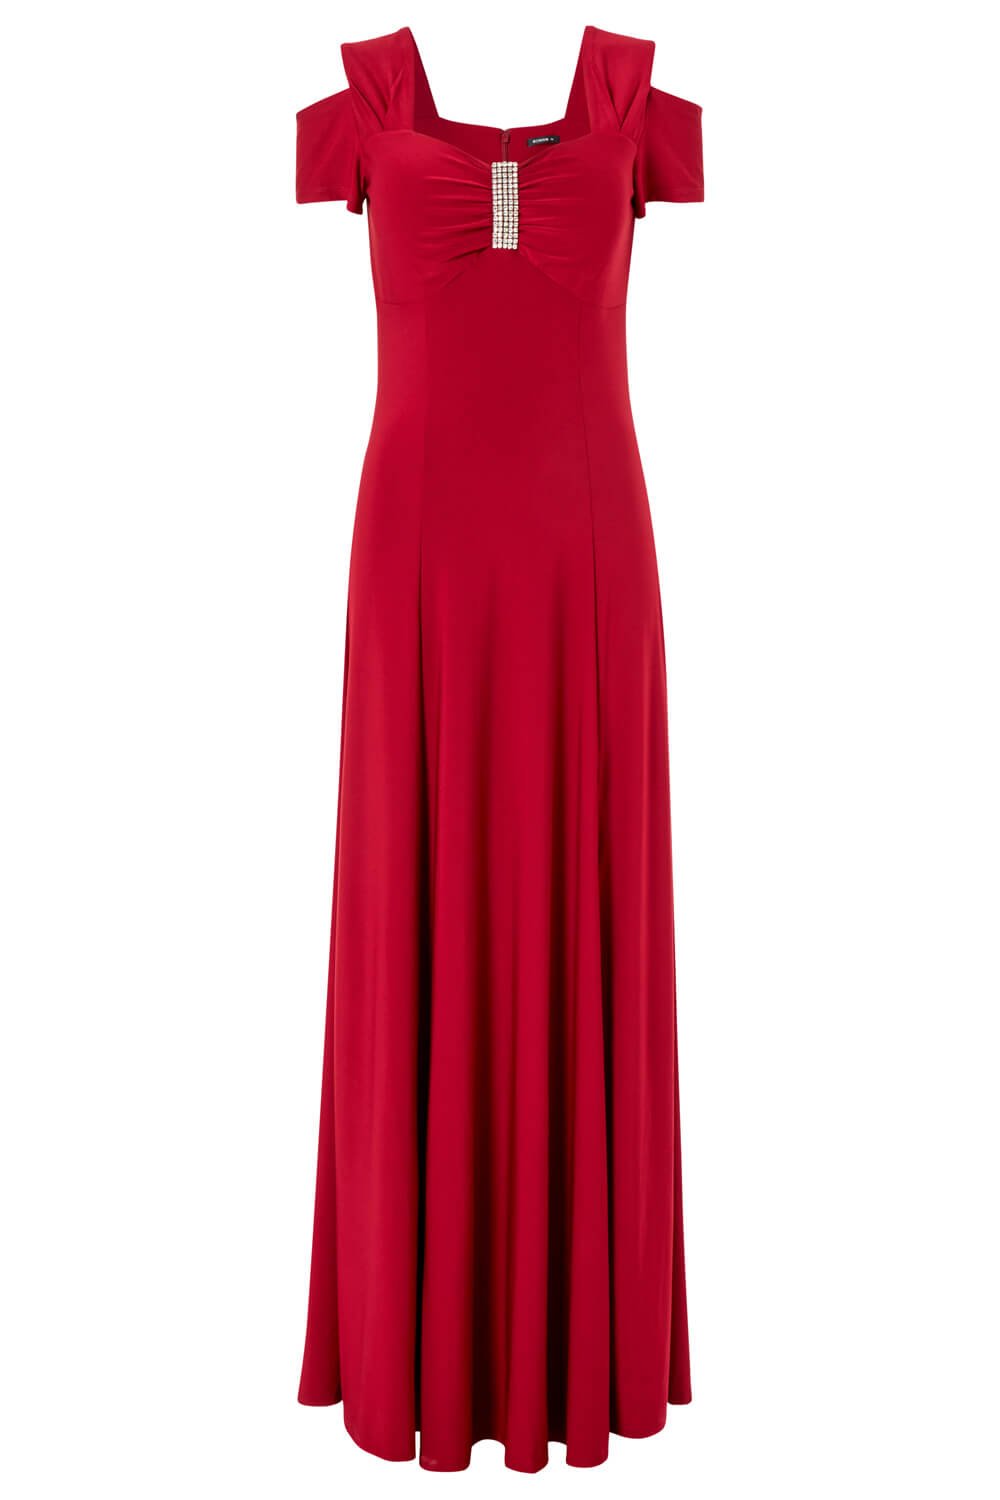 Red Diamante Cold Shoulder Maxi Dress, Image 4 of 4